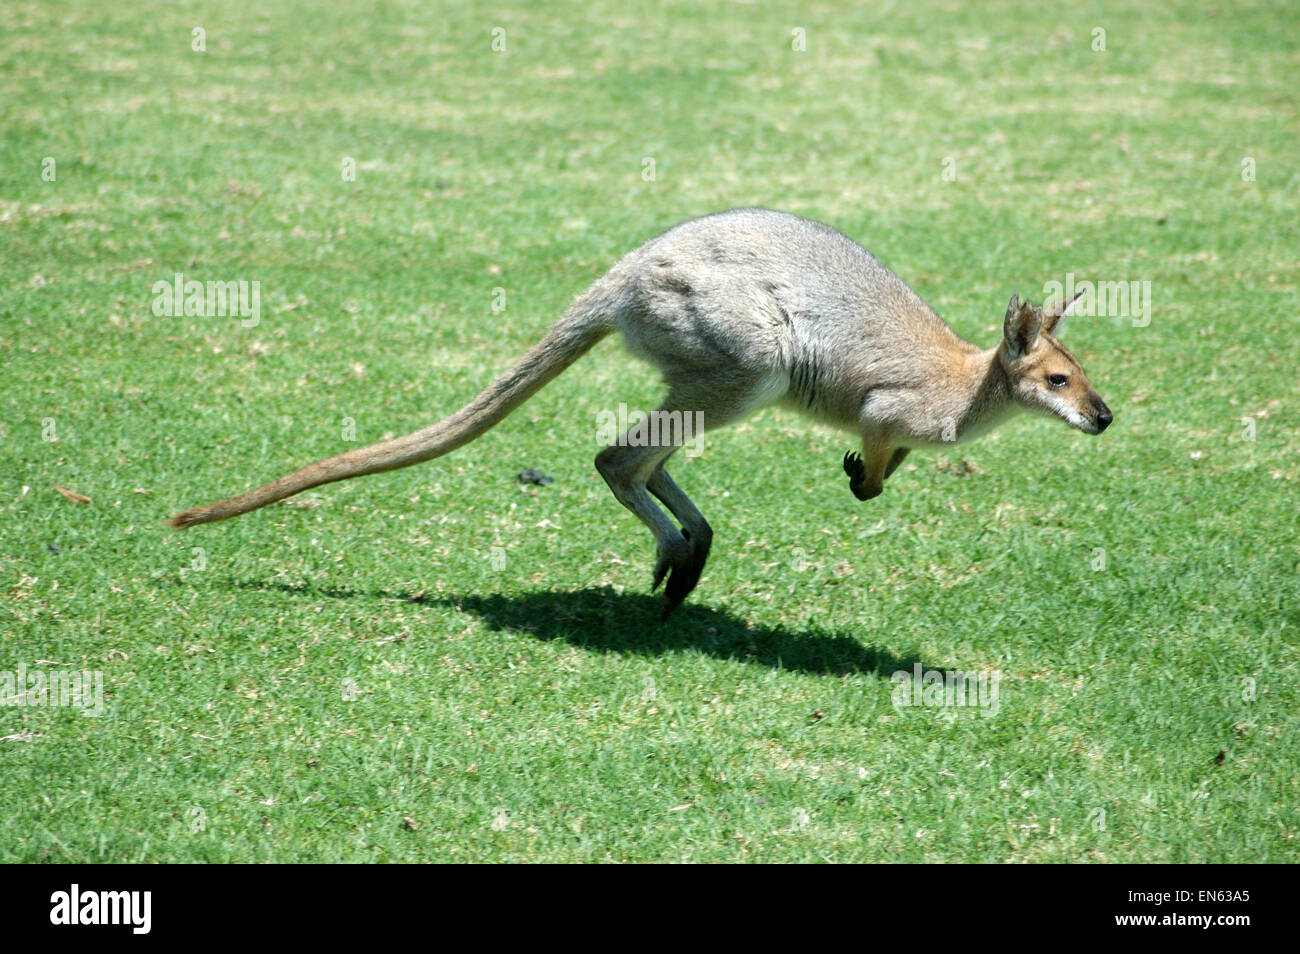 Red-necked wallaby, Macropus rufogriseus, also known as the Brush wallaby, Brush kangaroo, Brusher, or Red wallaby. Stock Photo